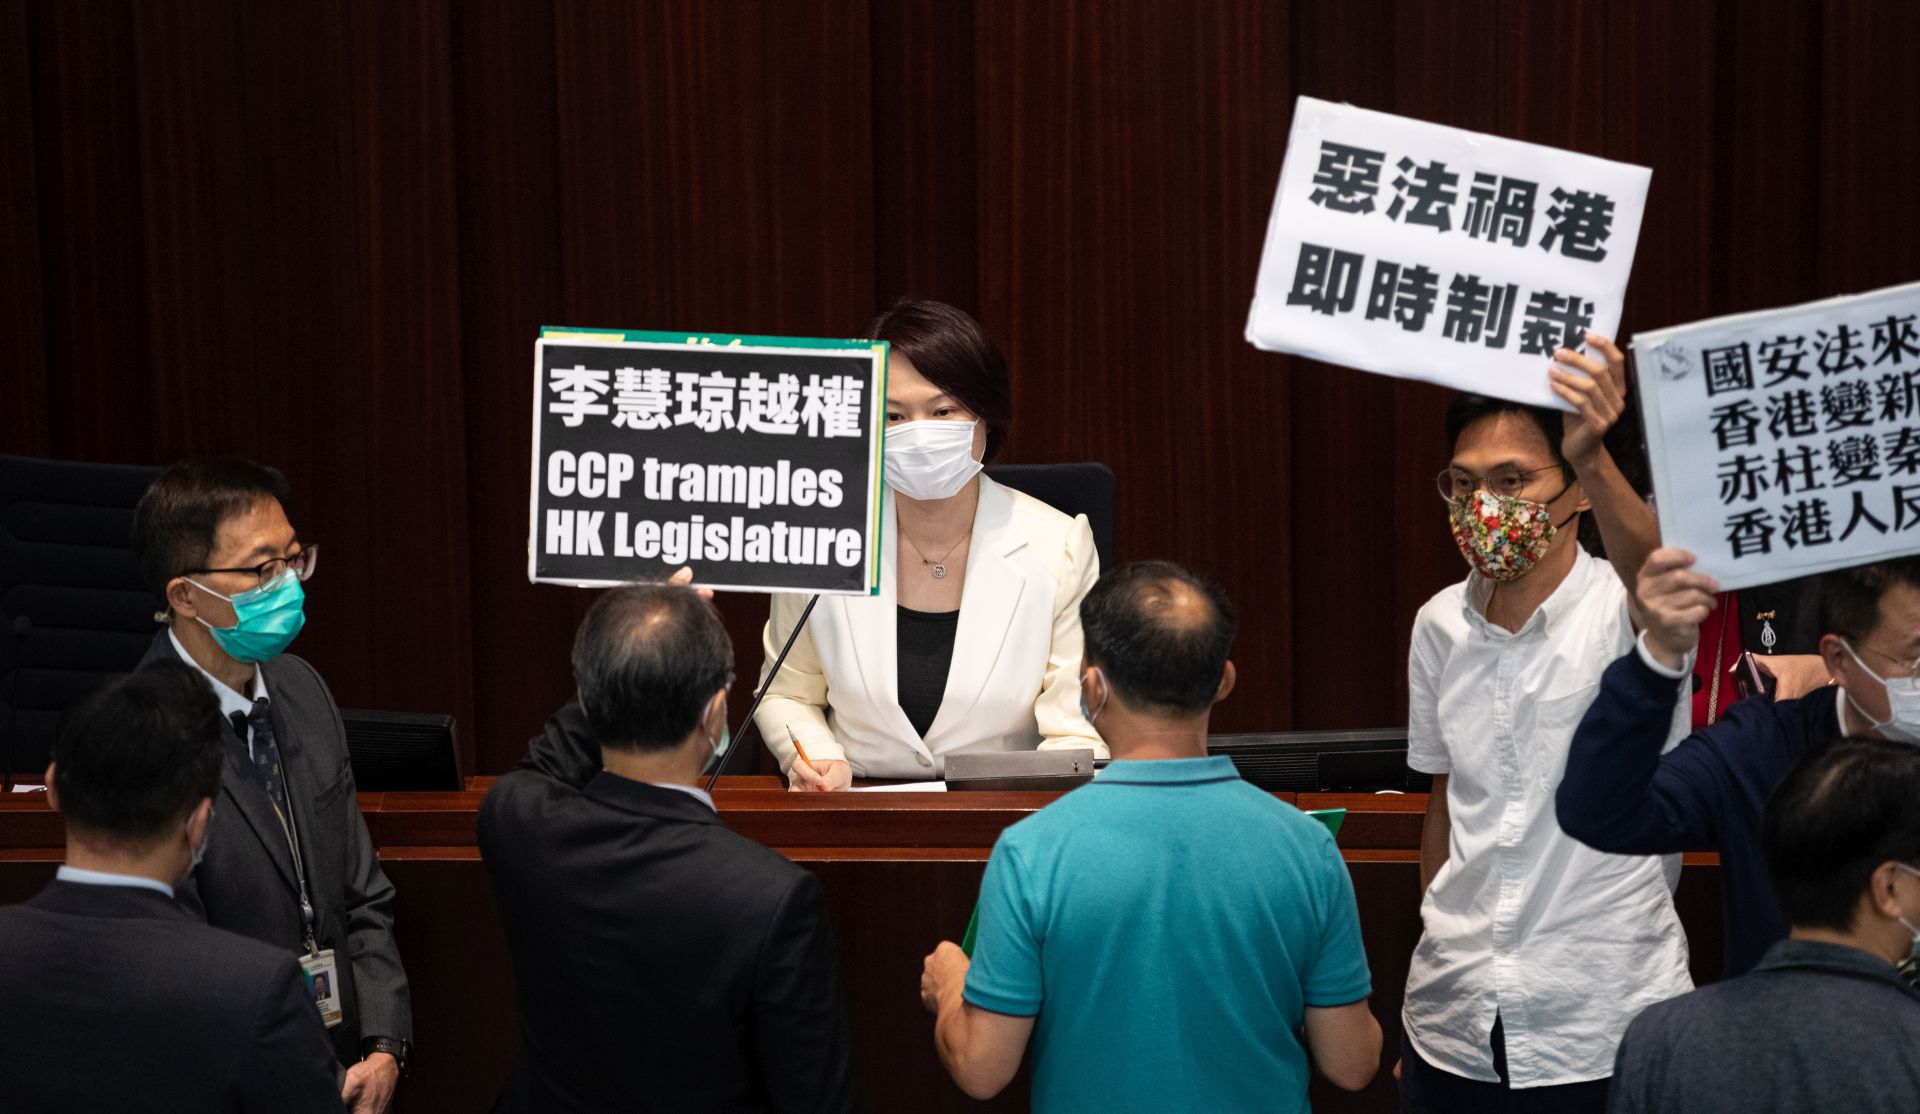 epa08436911 Pro-Beijing lawmaker and House Committee chairperson Starry Lee (C) is confronted by pan-democrat lawmakers at the Legislative Council in Hong Kong, China, 22 May 2020. China announced that it will introduce a new national security law in Hong Kong banning sedition, secession and subversion of the central government in Beijing through a method that could bypass Hong Kong's legislature.  EPA/JEROME FAVRE